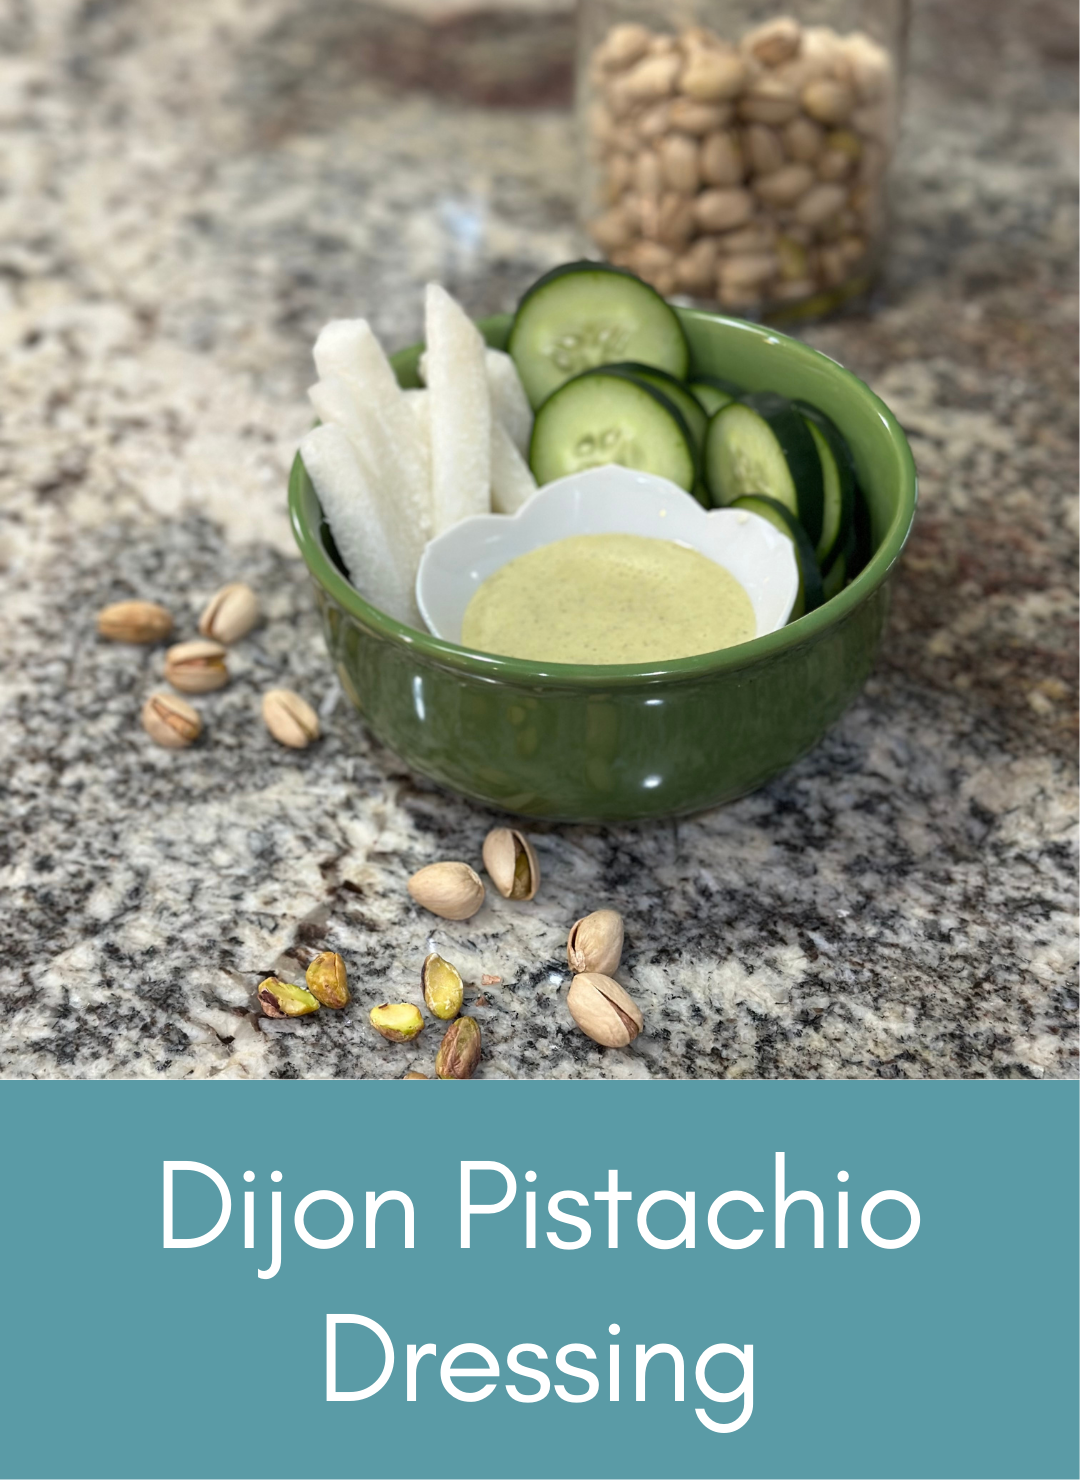 Dijon pistachio dressing Picture with link to recipe